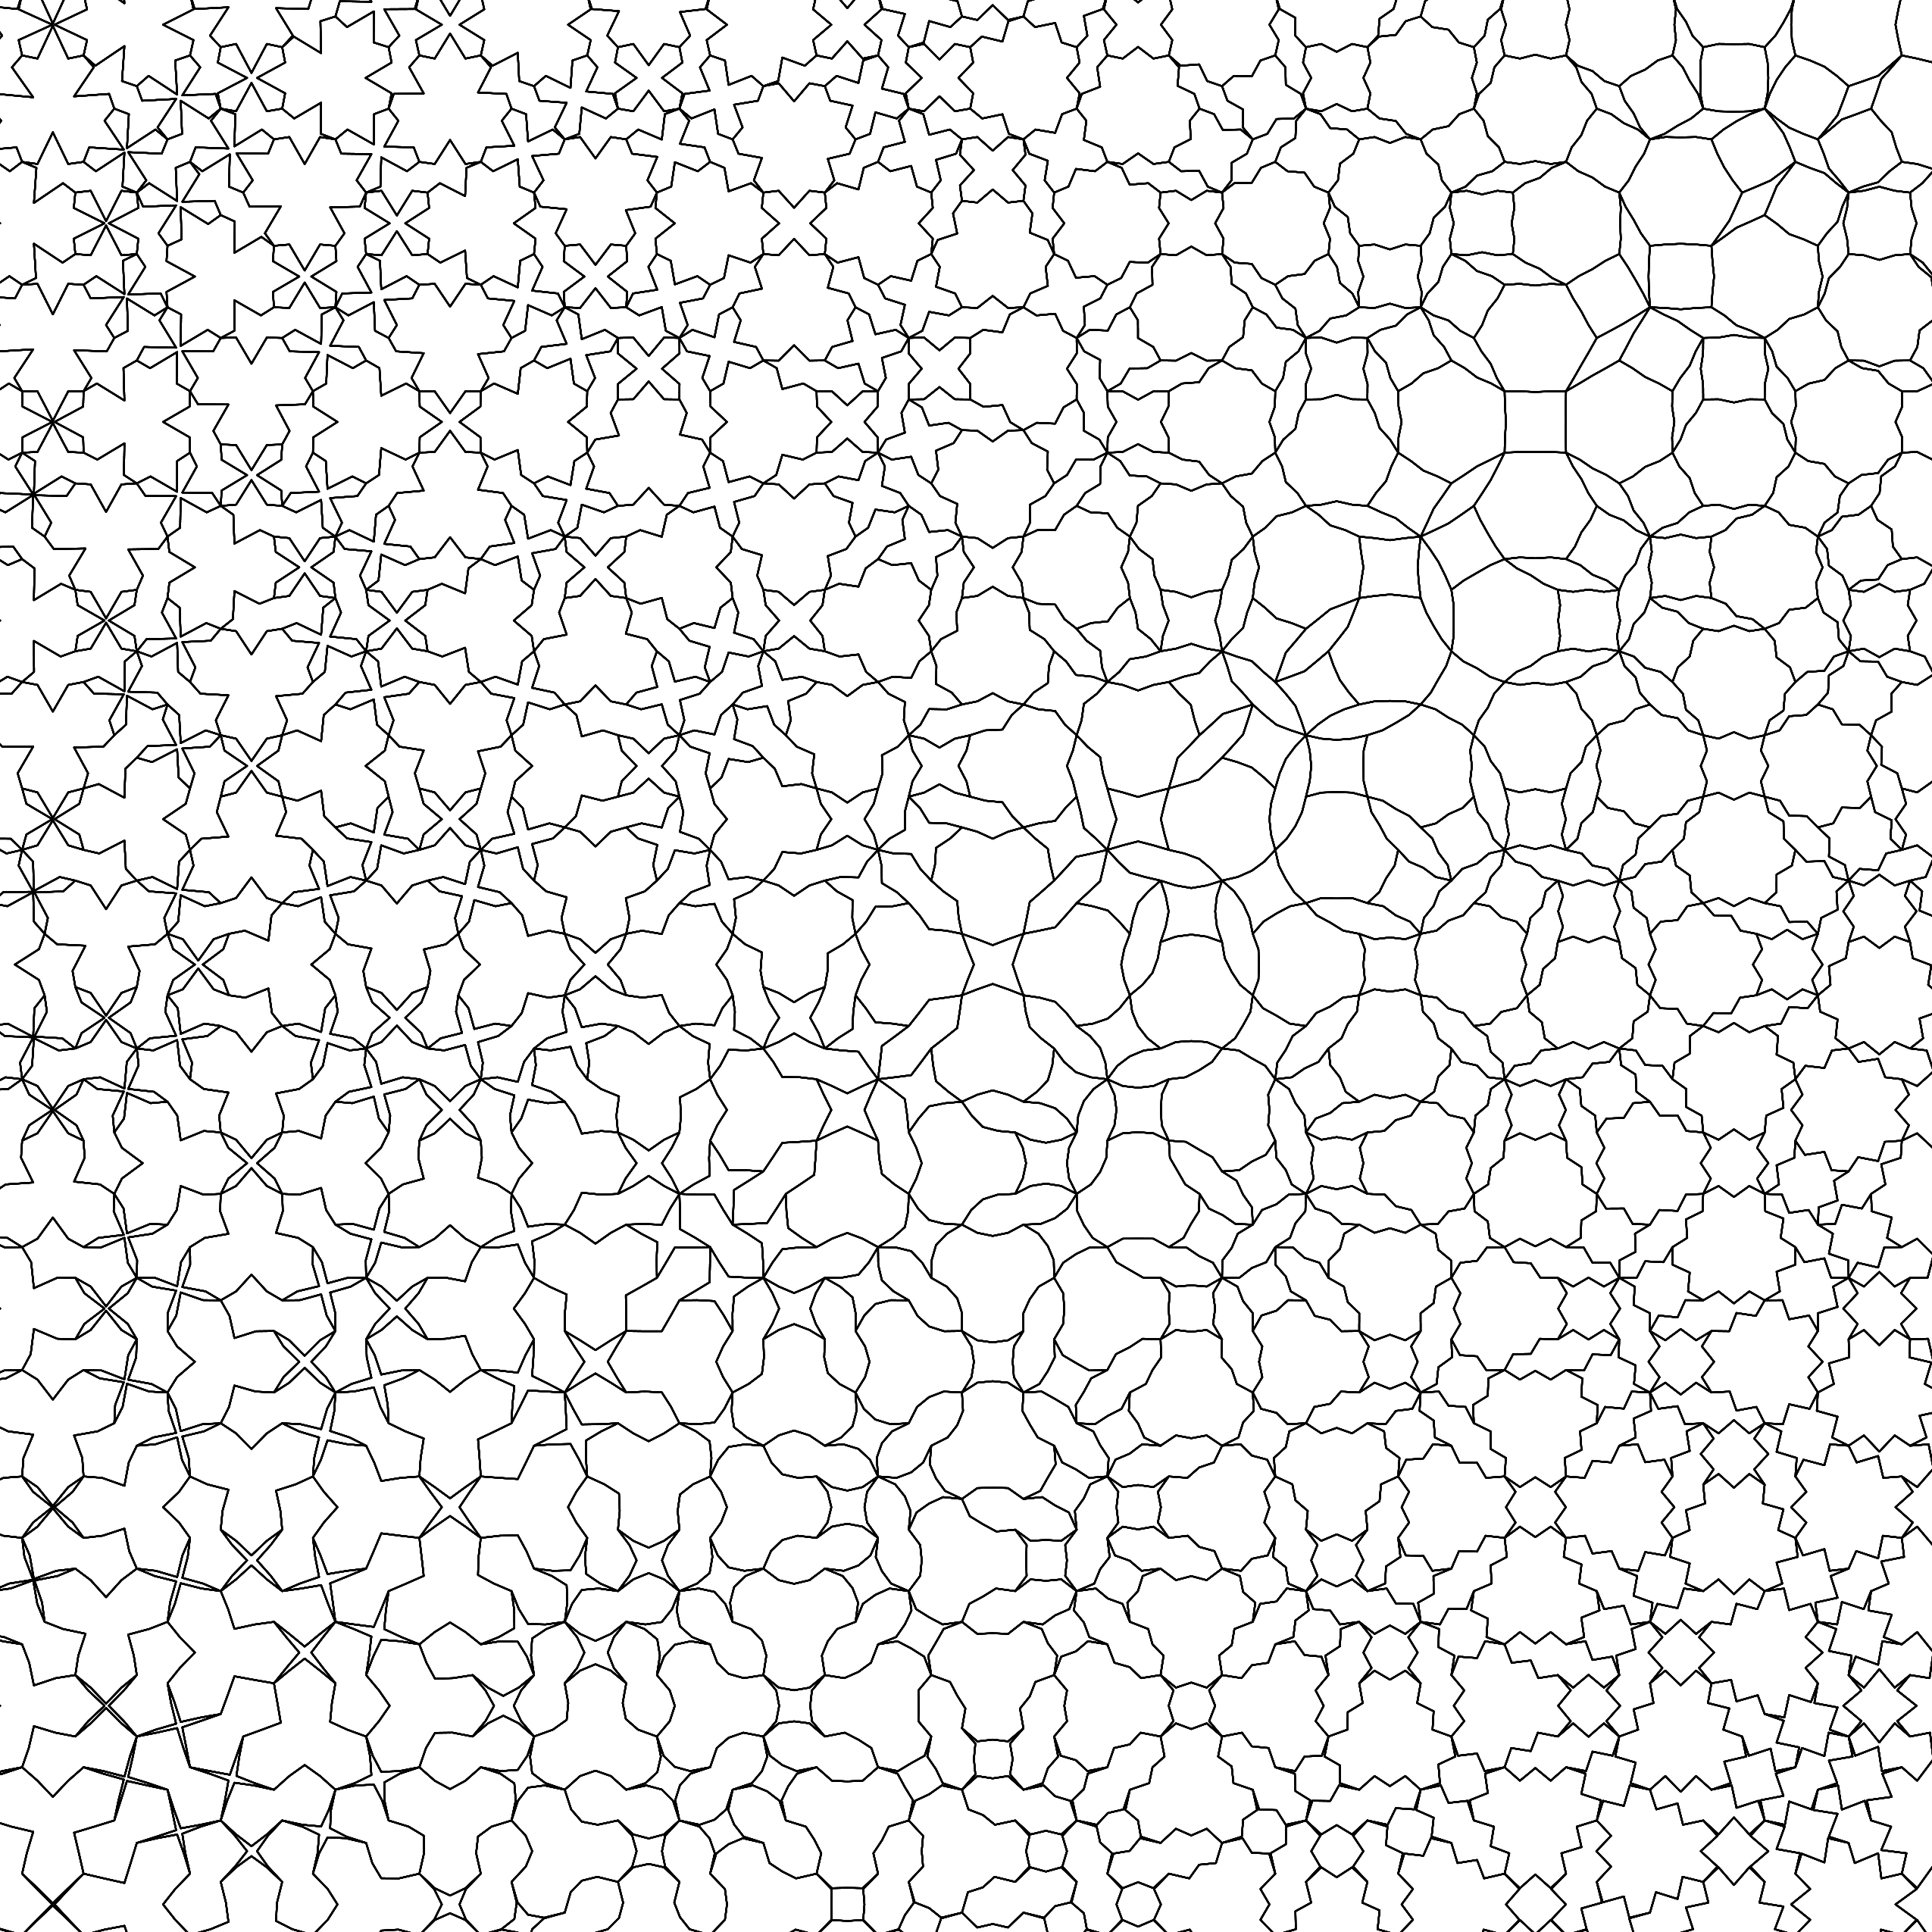 A deformation is a tiling in which the tiles slowly change while keeping the same underlying pattern. The earliest deformations, seen in the work of the Dutch mathematical artist M. C. Escher, morphed in a single dimension: from left to right, or from top to bottom. In this image, the deformation is two- dimensional. Edmund has created four different non-periodic tilings, one in each corner, that morph into each other from left to right and from top to bottom. Deformations are the nearest geometry gets to a “temporal” art form. You only get a feel for the pattern by following how the shapes shift across the page. Art copyright © Edmund Harriss.